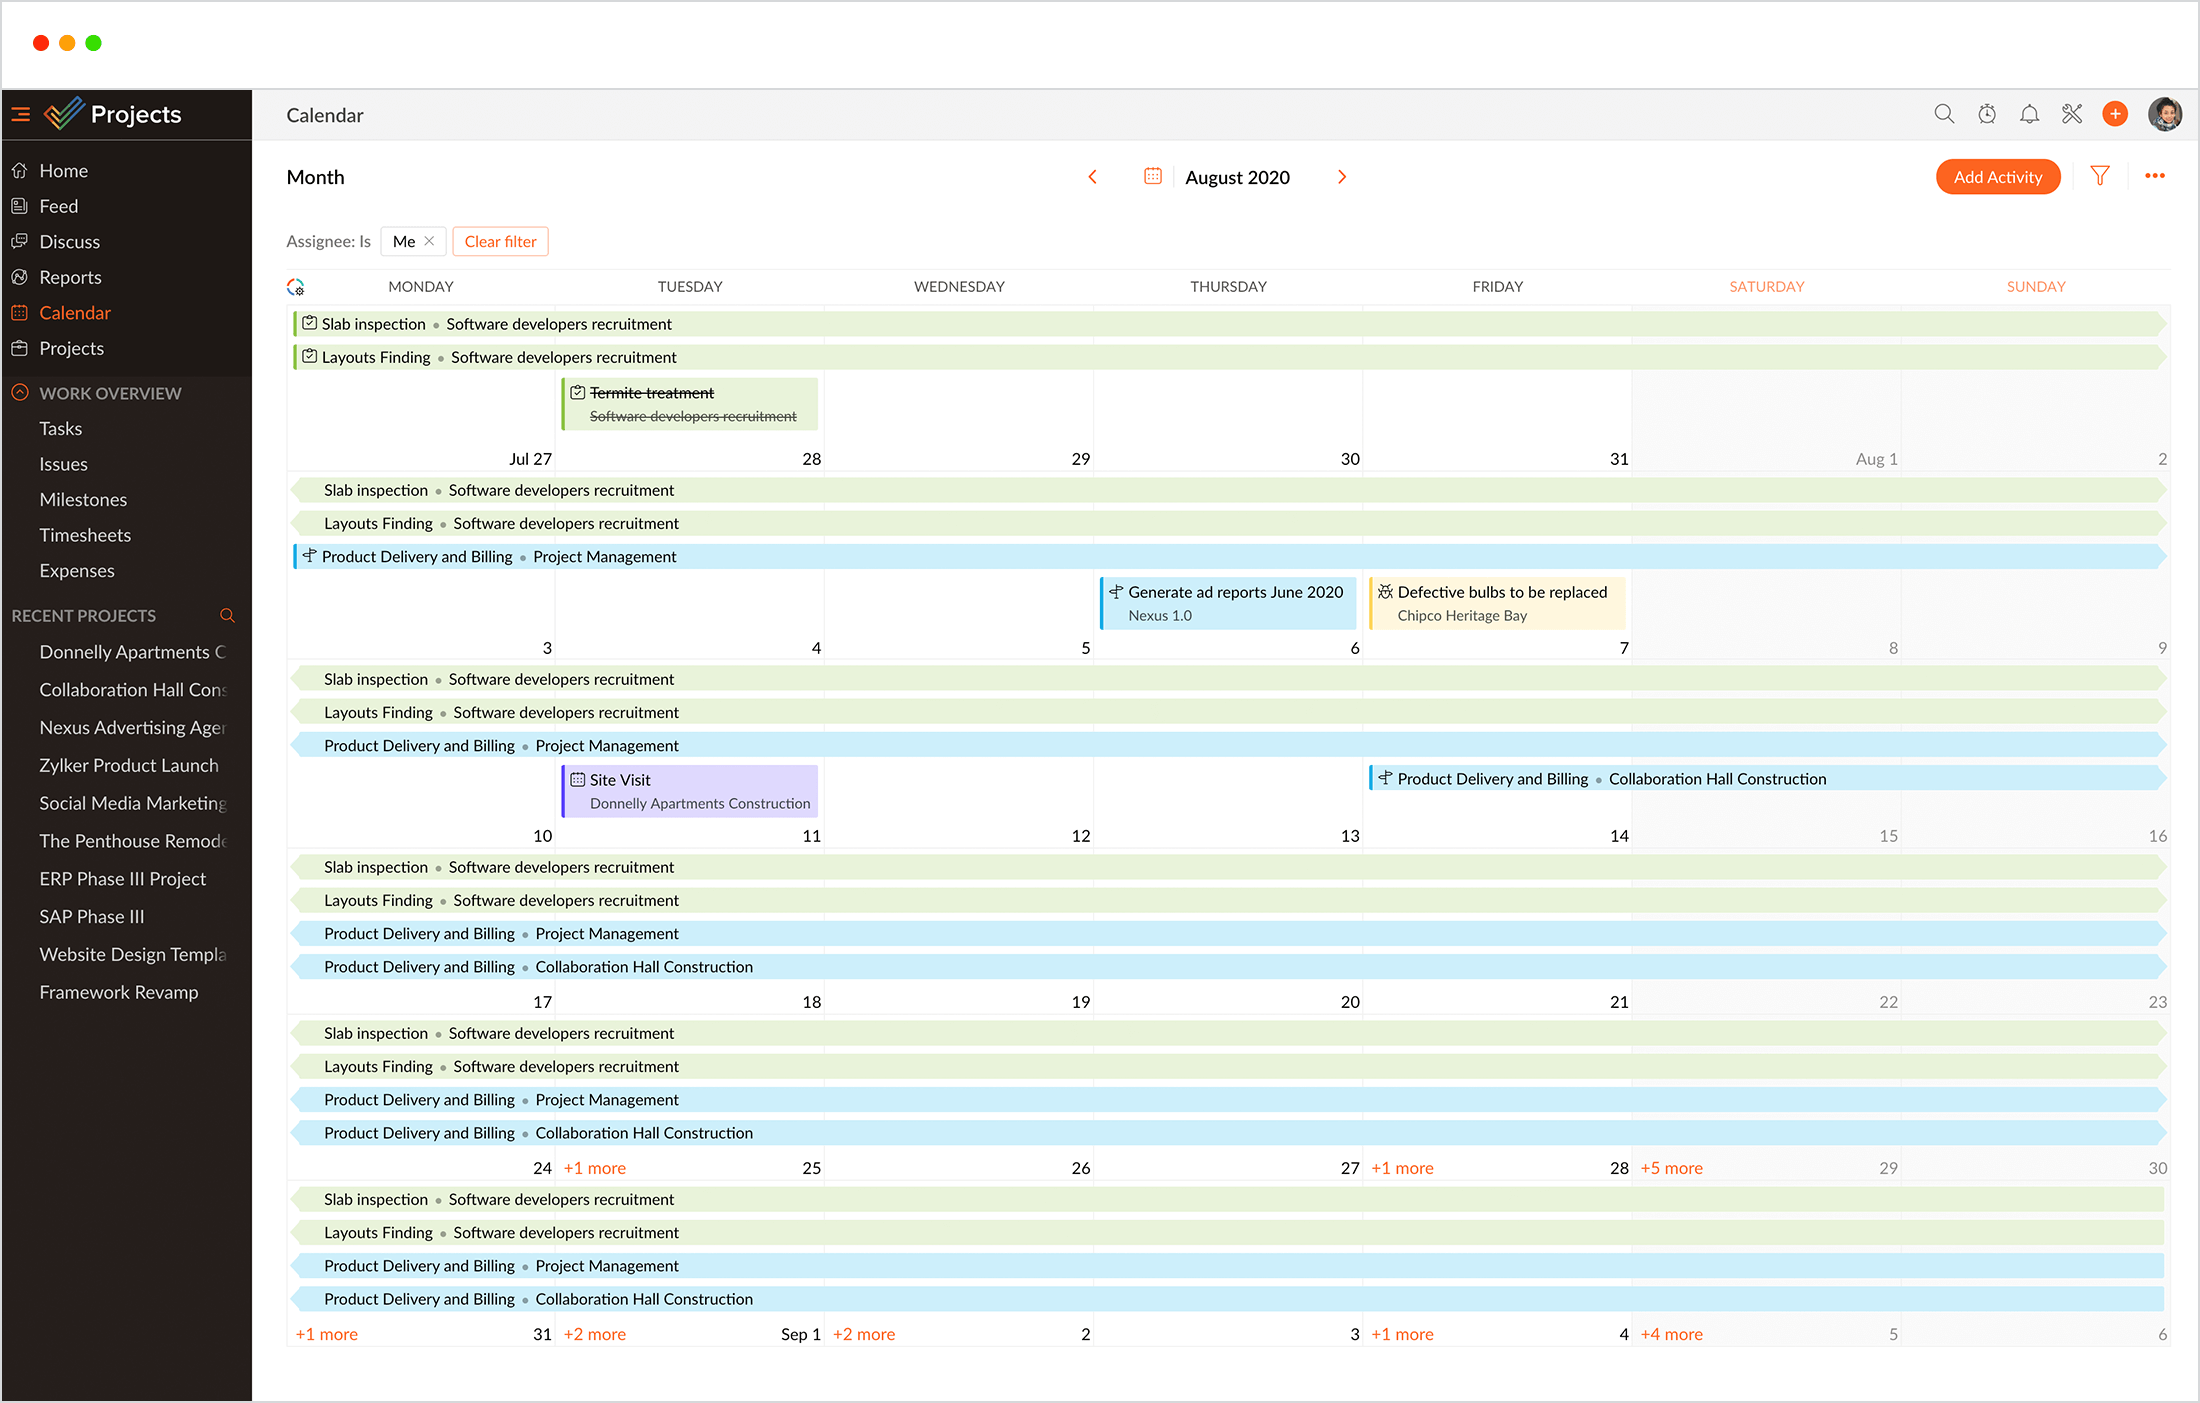 Calendar to manage project schedules